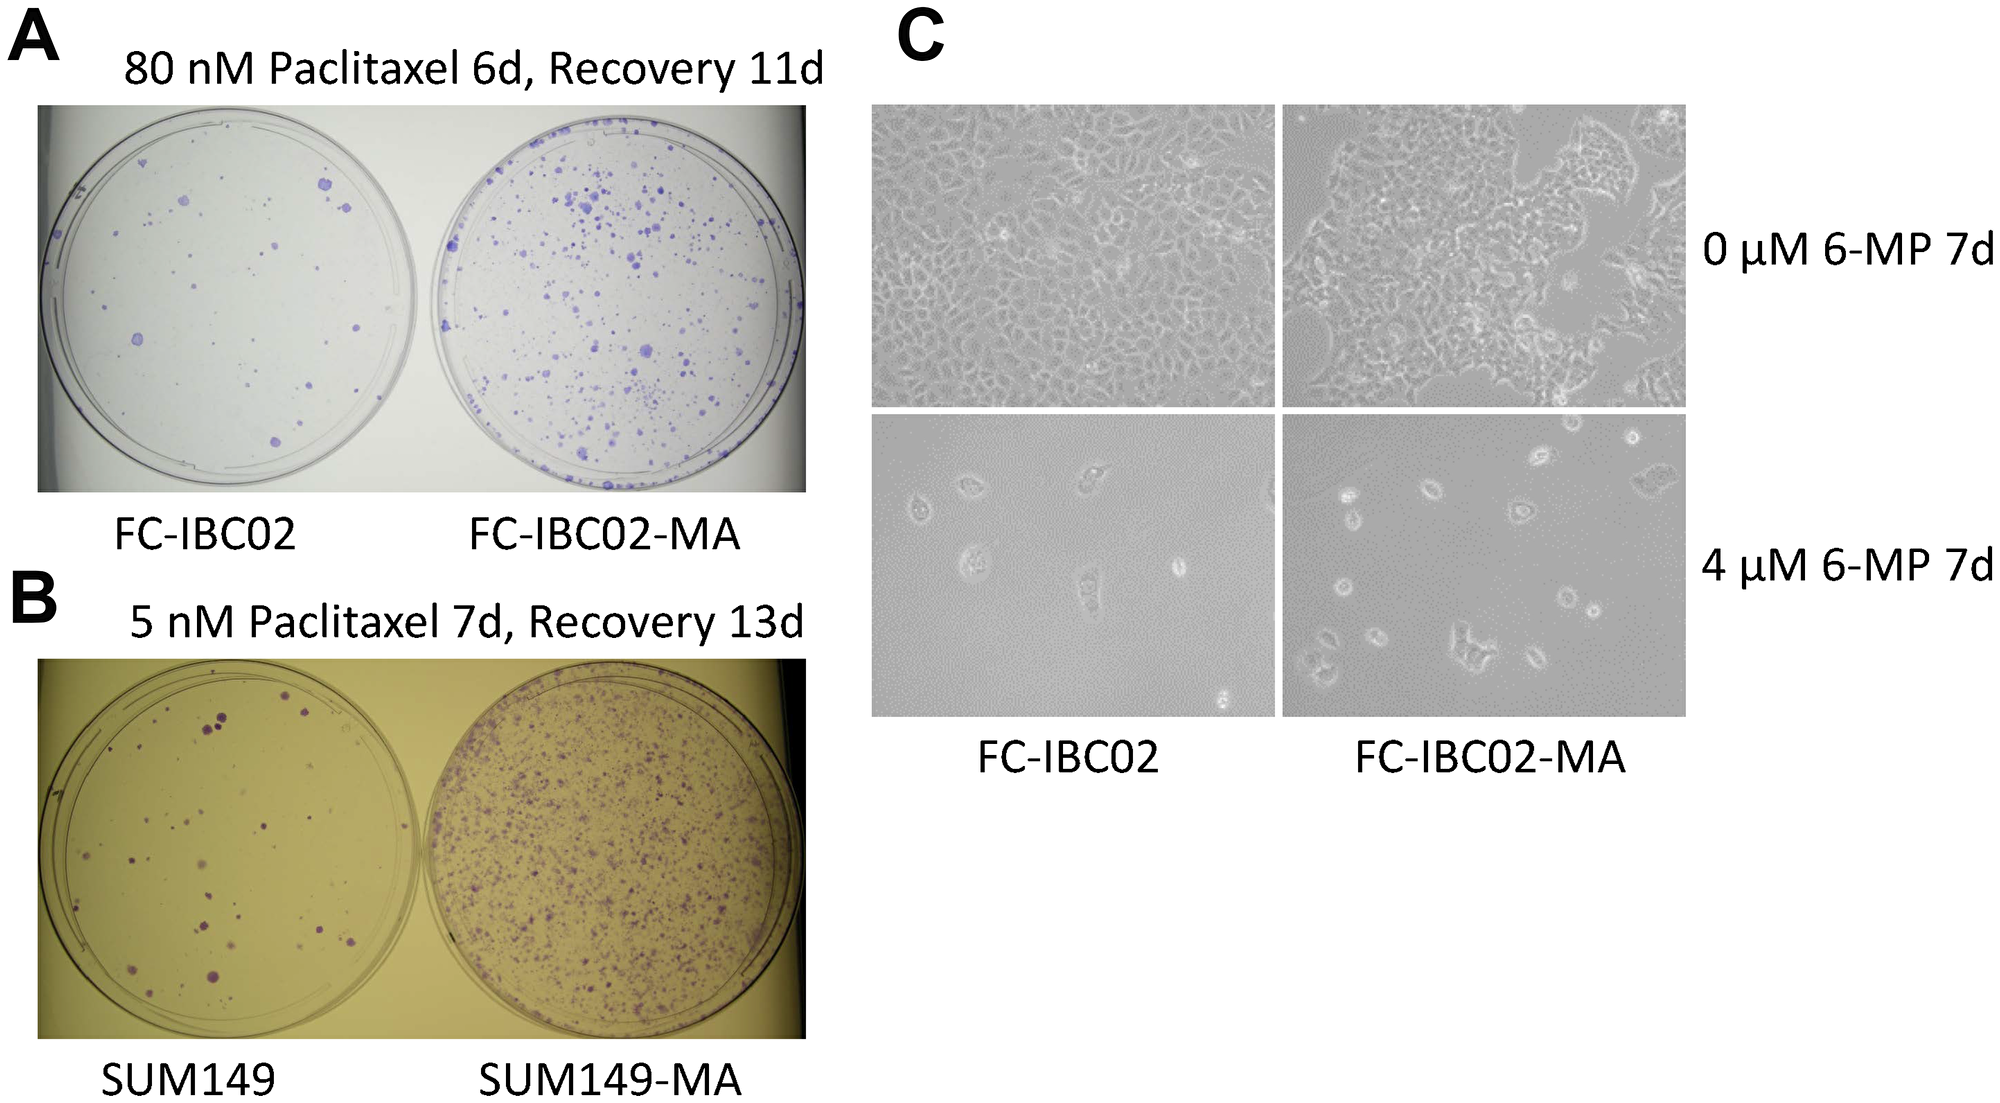 6-MP severely inhibits highly resistant FC-IBC02 and FC-IBC02-MA cells.